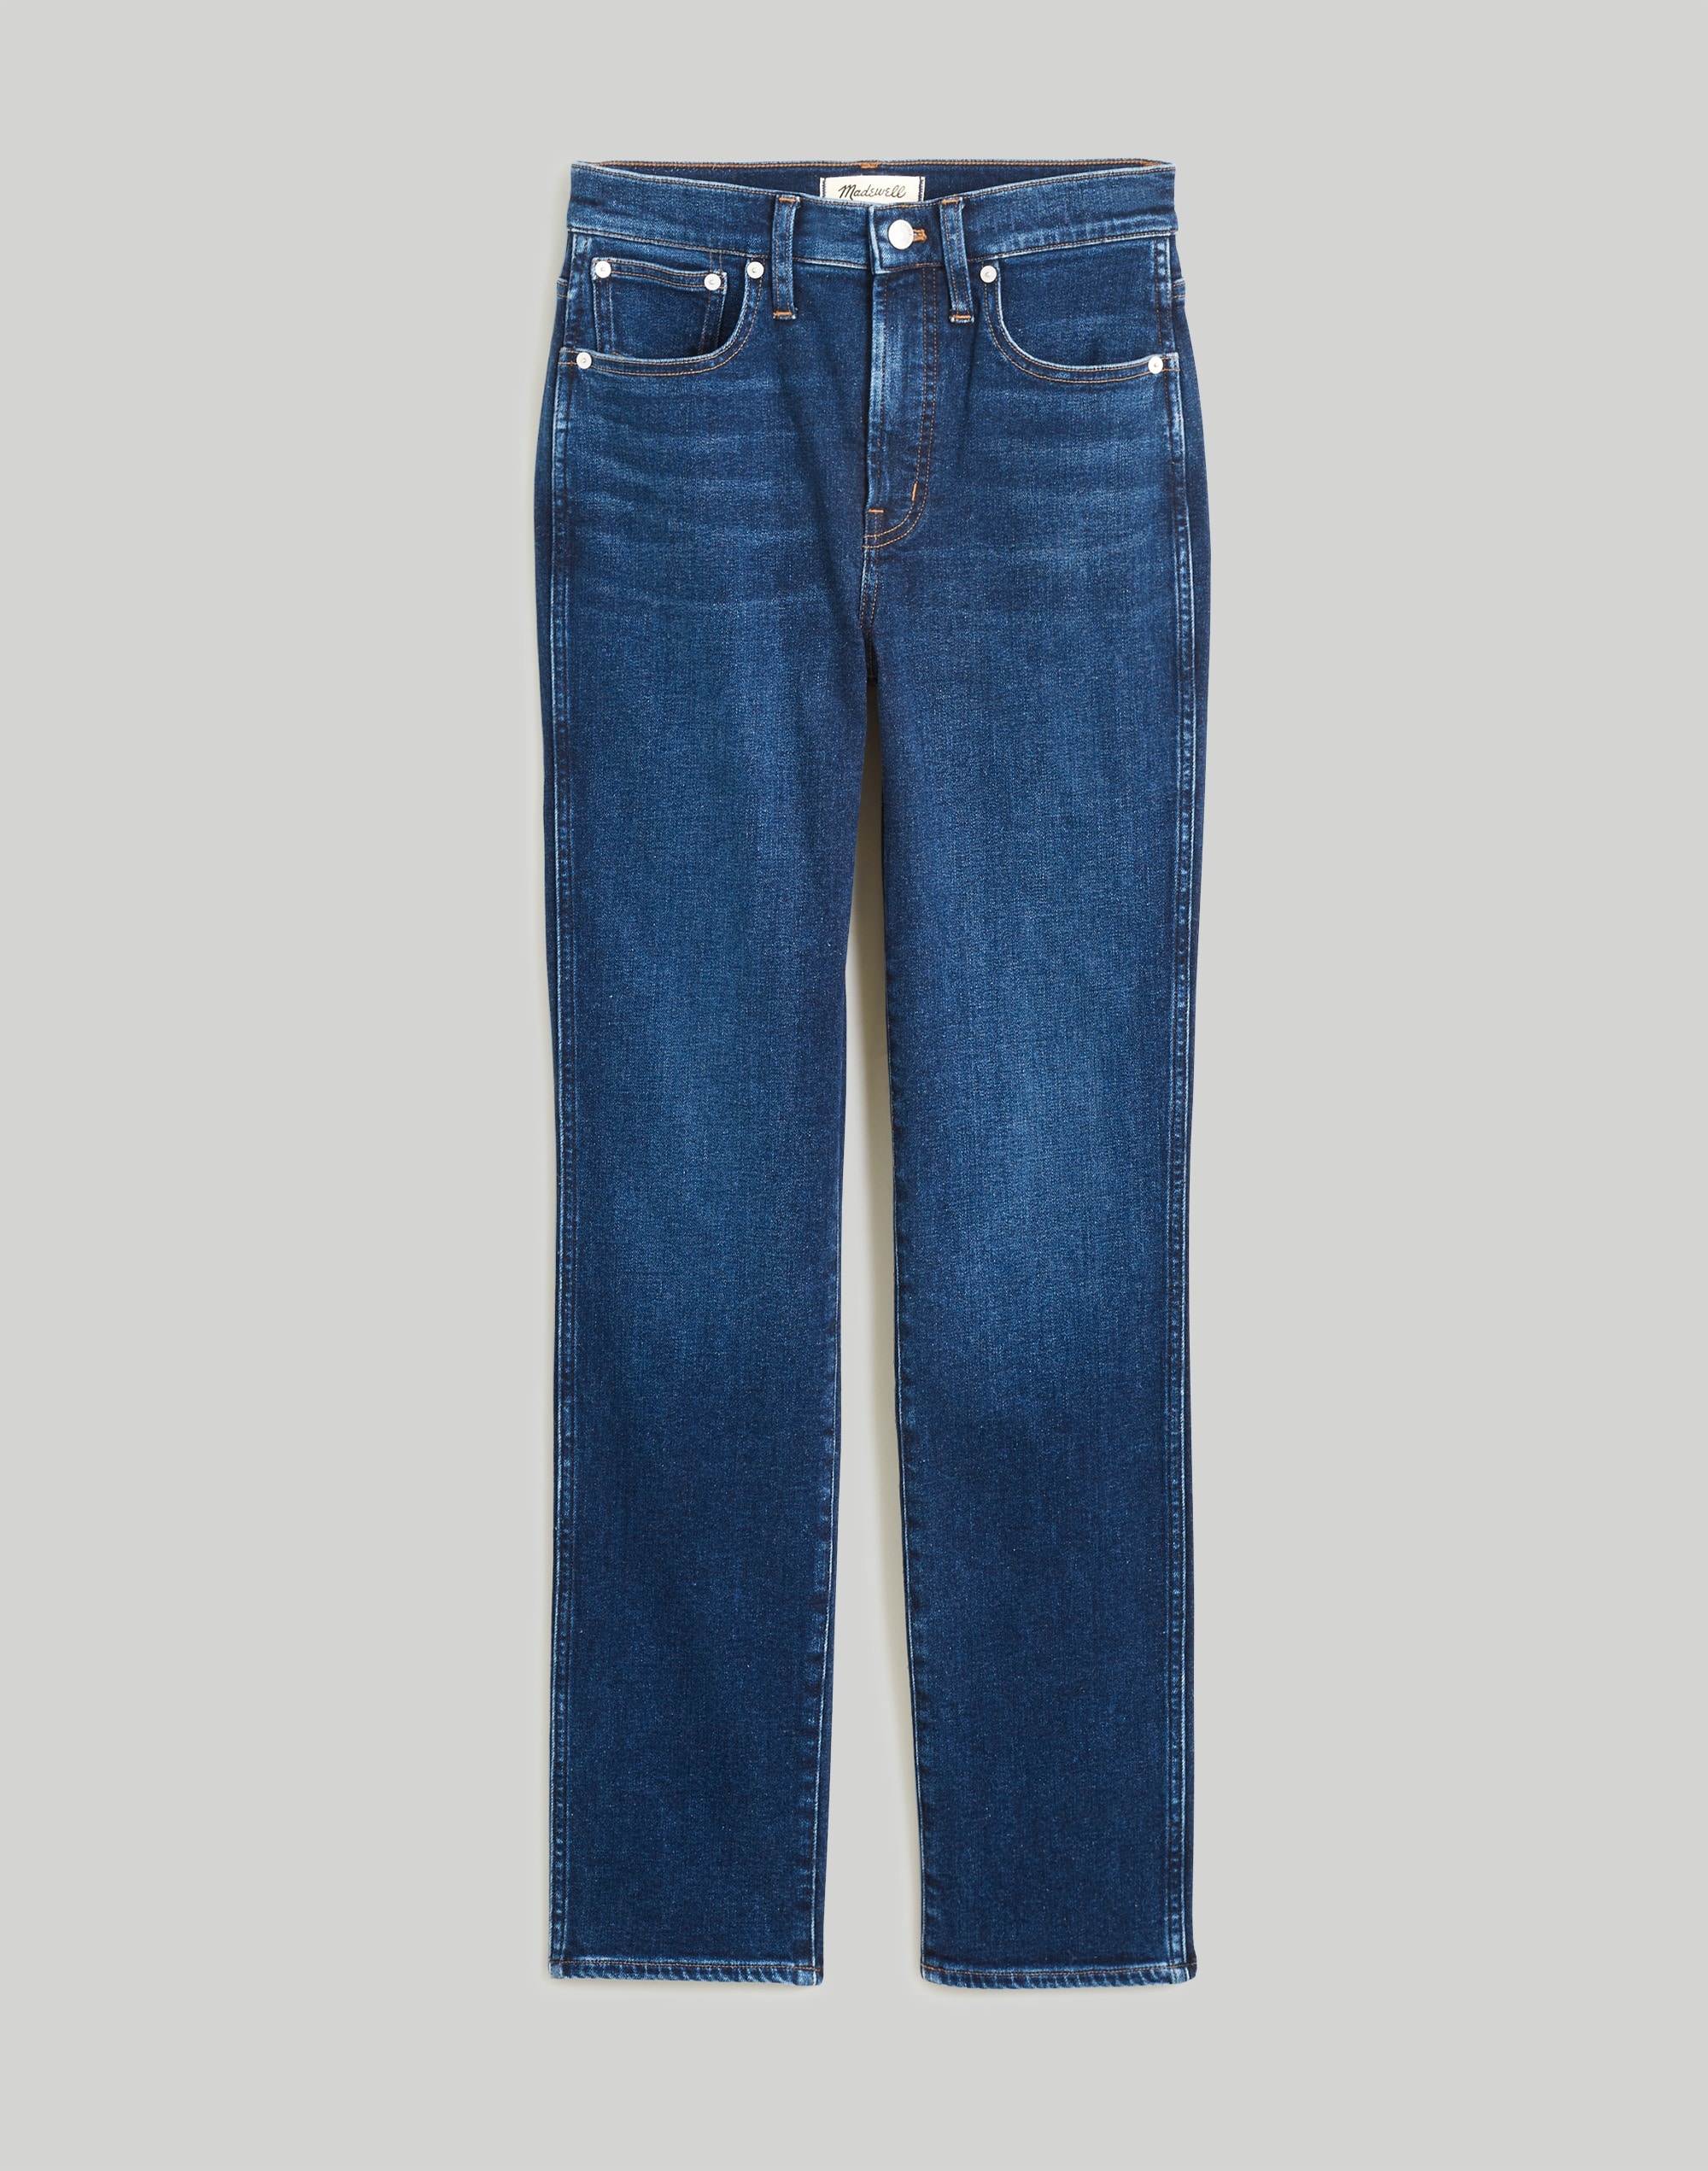 The Curvy Perfect Vintage Jean Myers Wash: Instacozy Edition